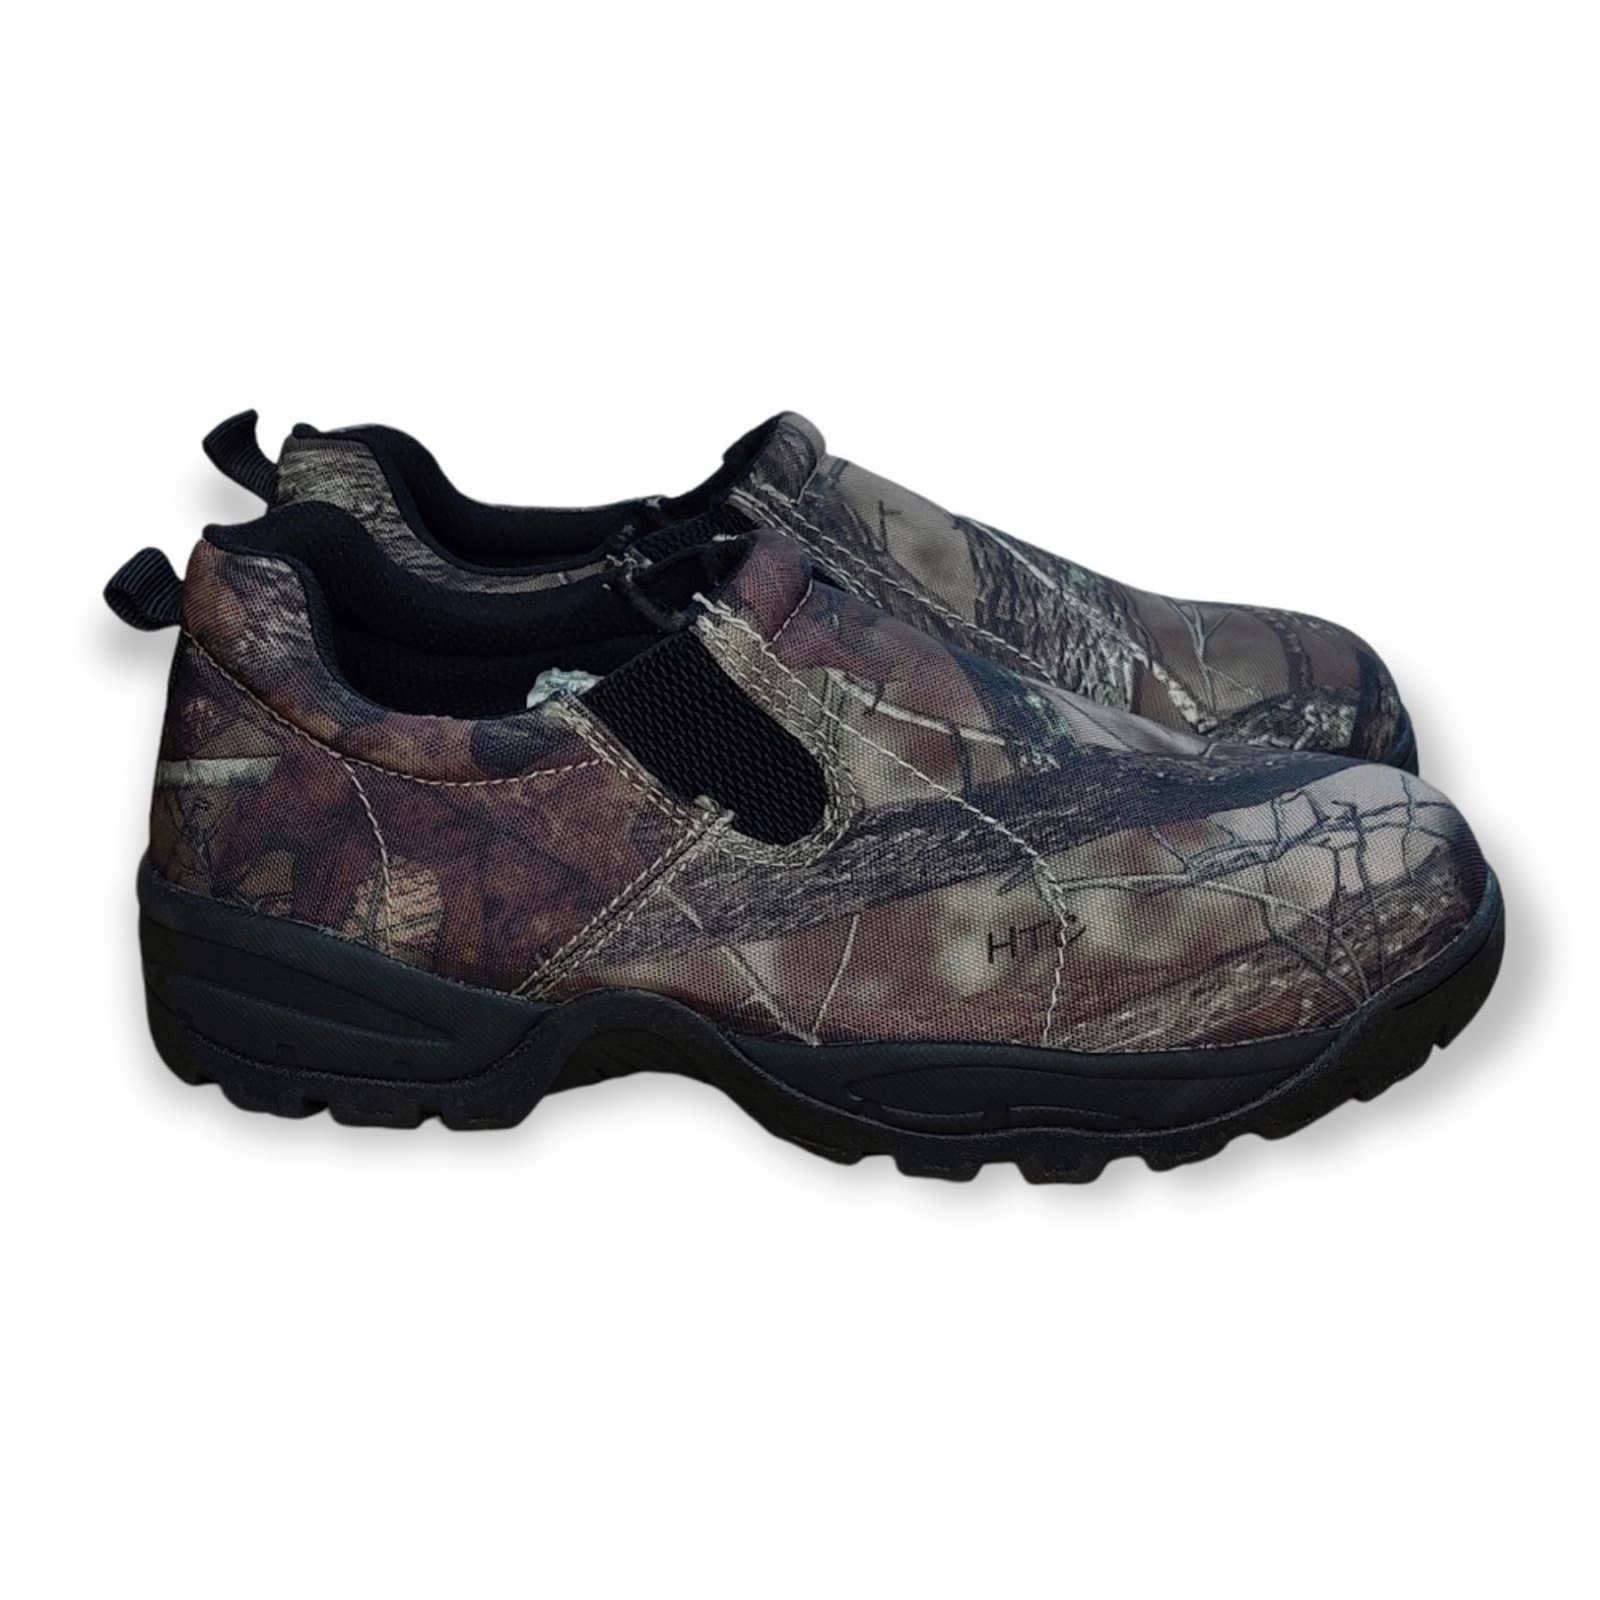 RedHead XTR Camo Moc Slip-On Shoes For Toddlers Or Kids, Cabelas Kids Shoes